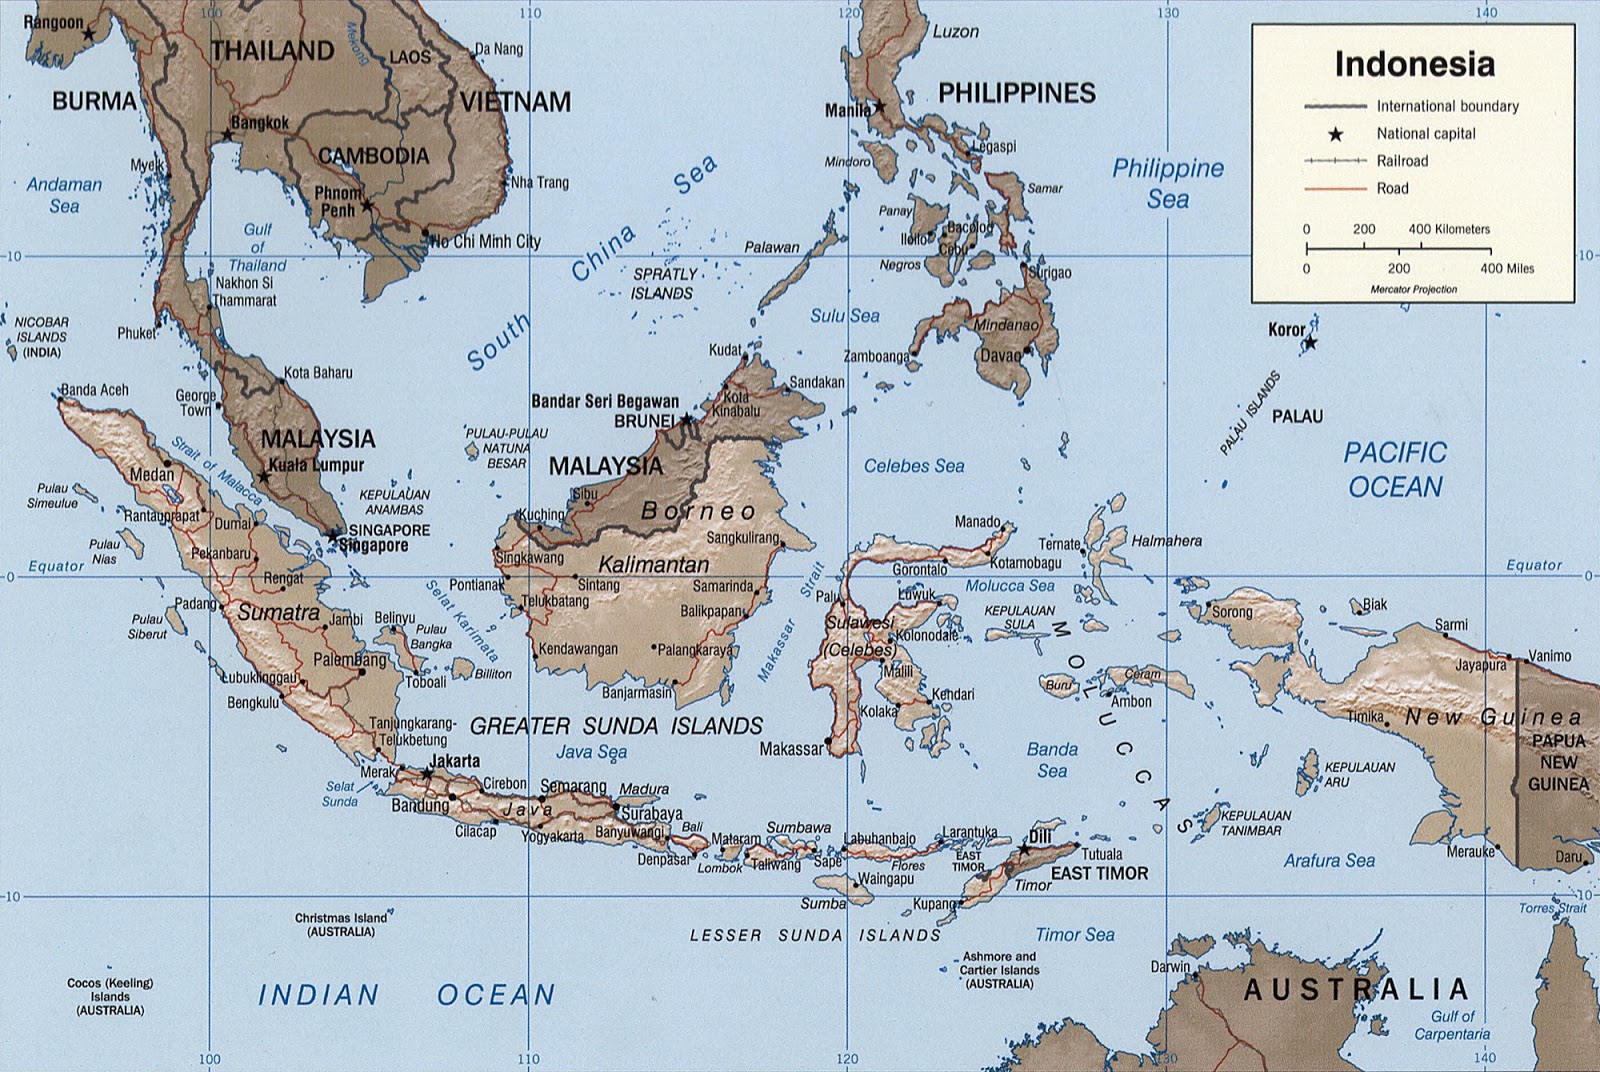 A map of Indonesia showing Wallace’s Line in blue. To the west lie islands harboring Asiatic fauna and to the east is Wallacea harboring a mixed Asiatic and Australasian fauna. Lyde